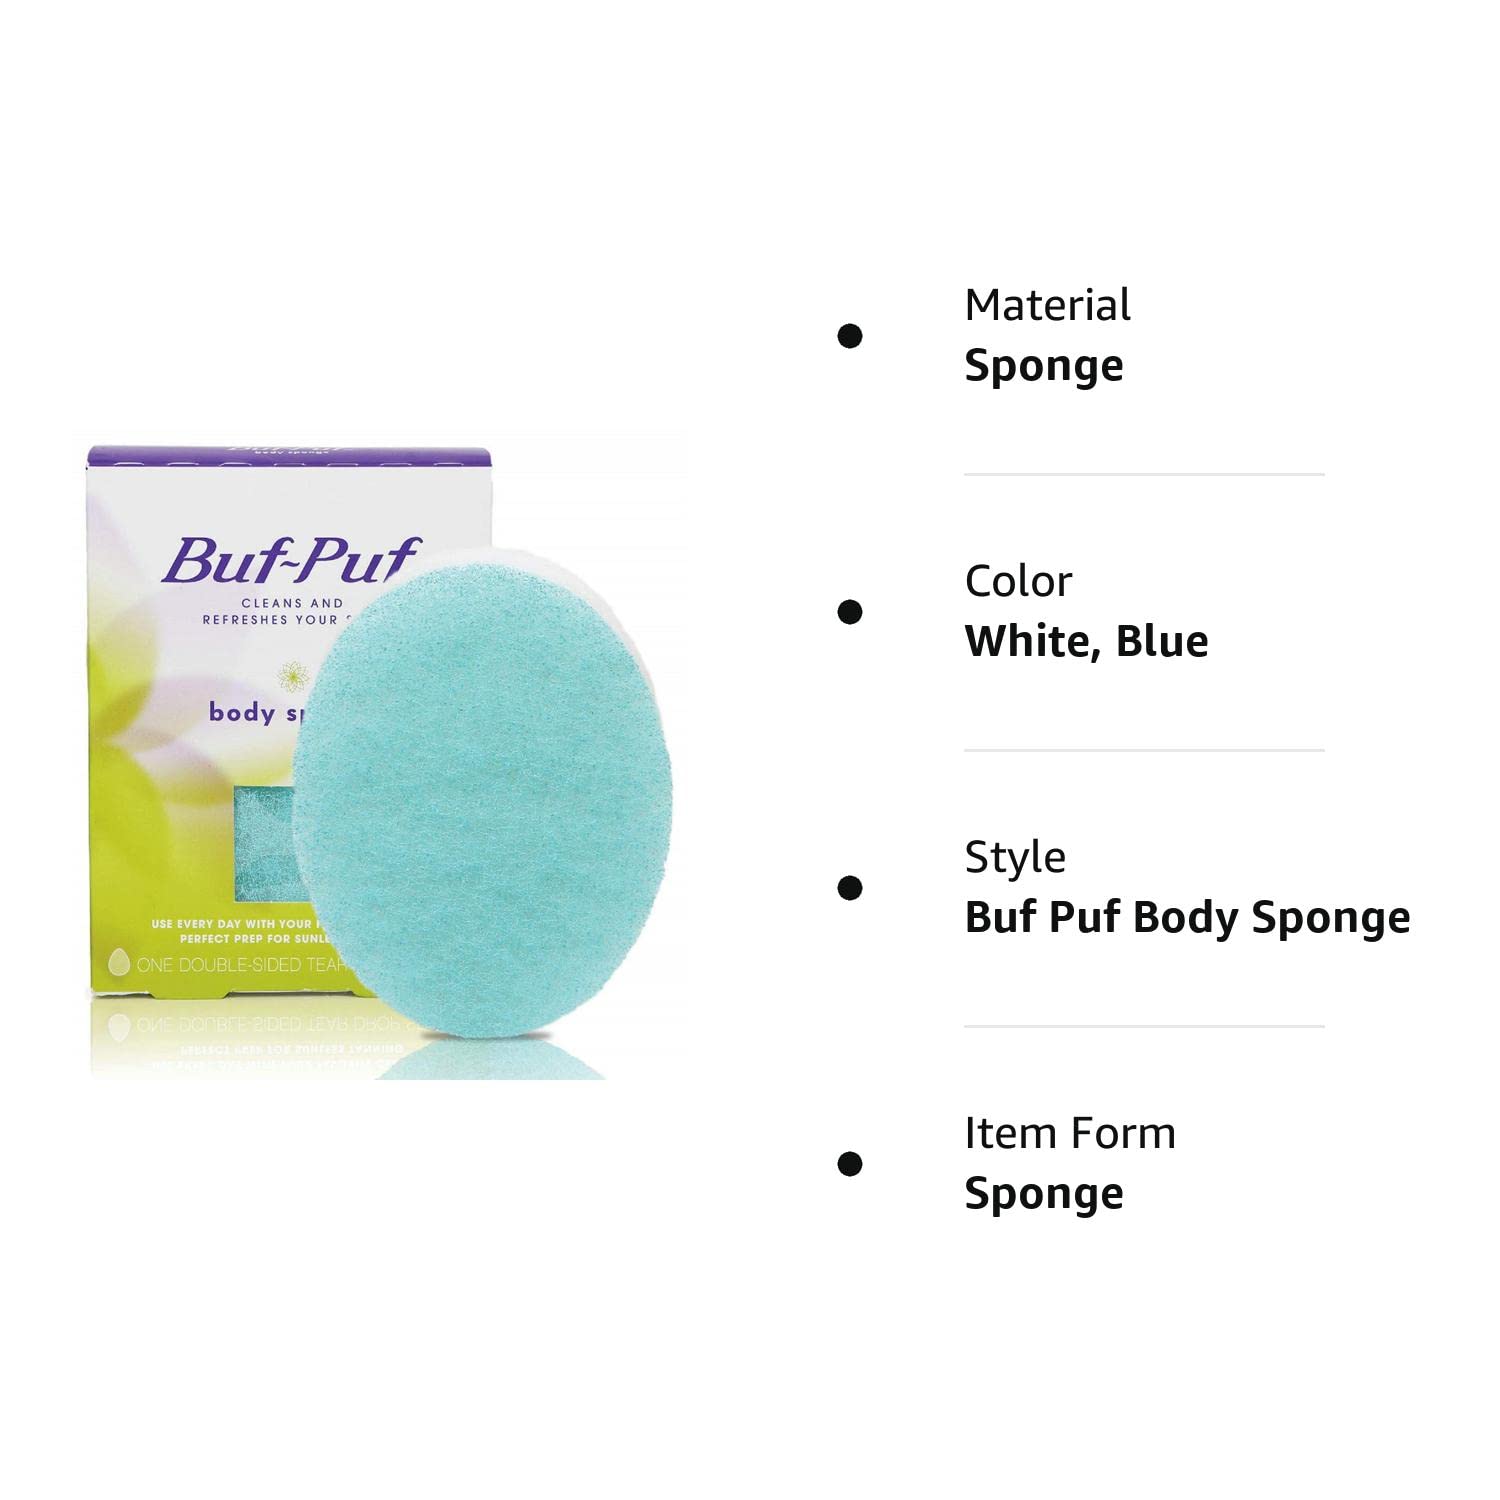 Buf-Puf Body Sponge, Bath Sponge, Dermatologist Developed, Cleanses Skin of Dirt, and Excess Oil, Reusable, Exfoliating, 1 Count